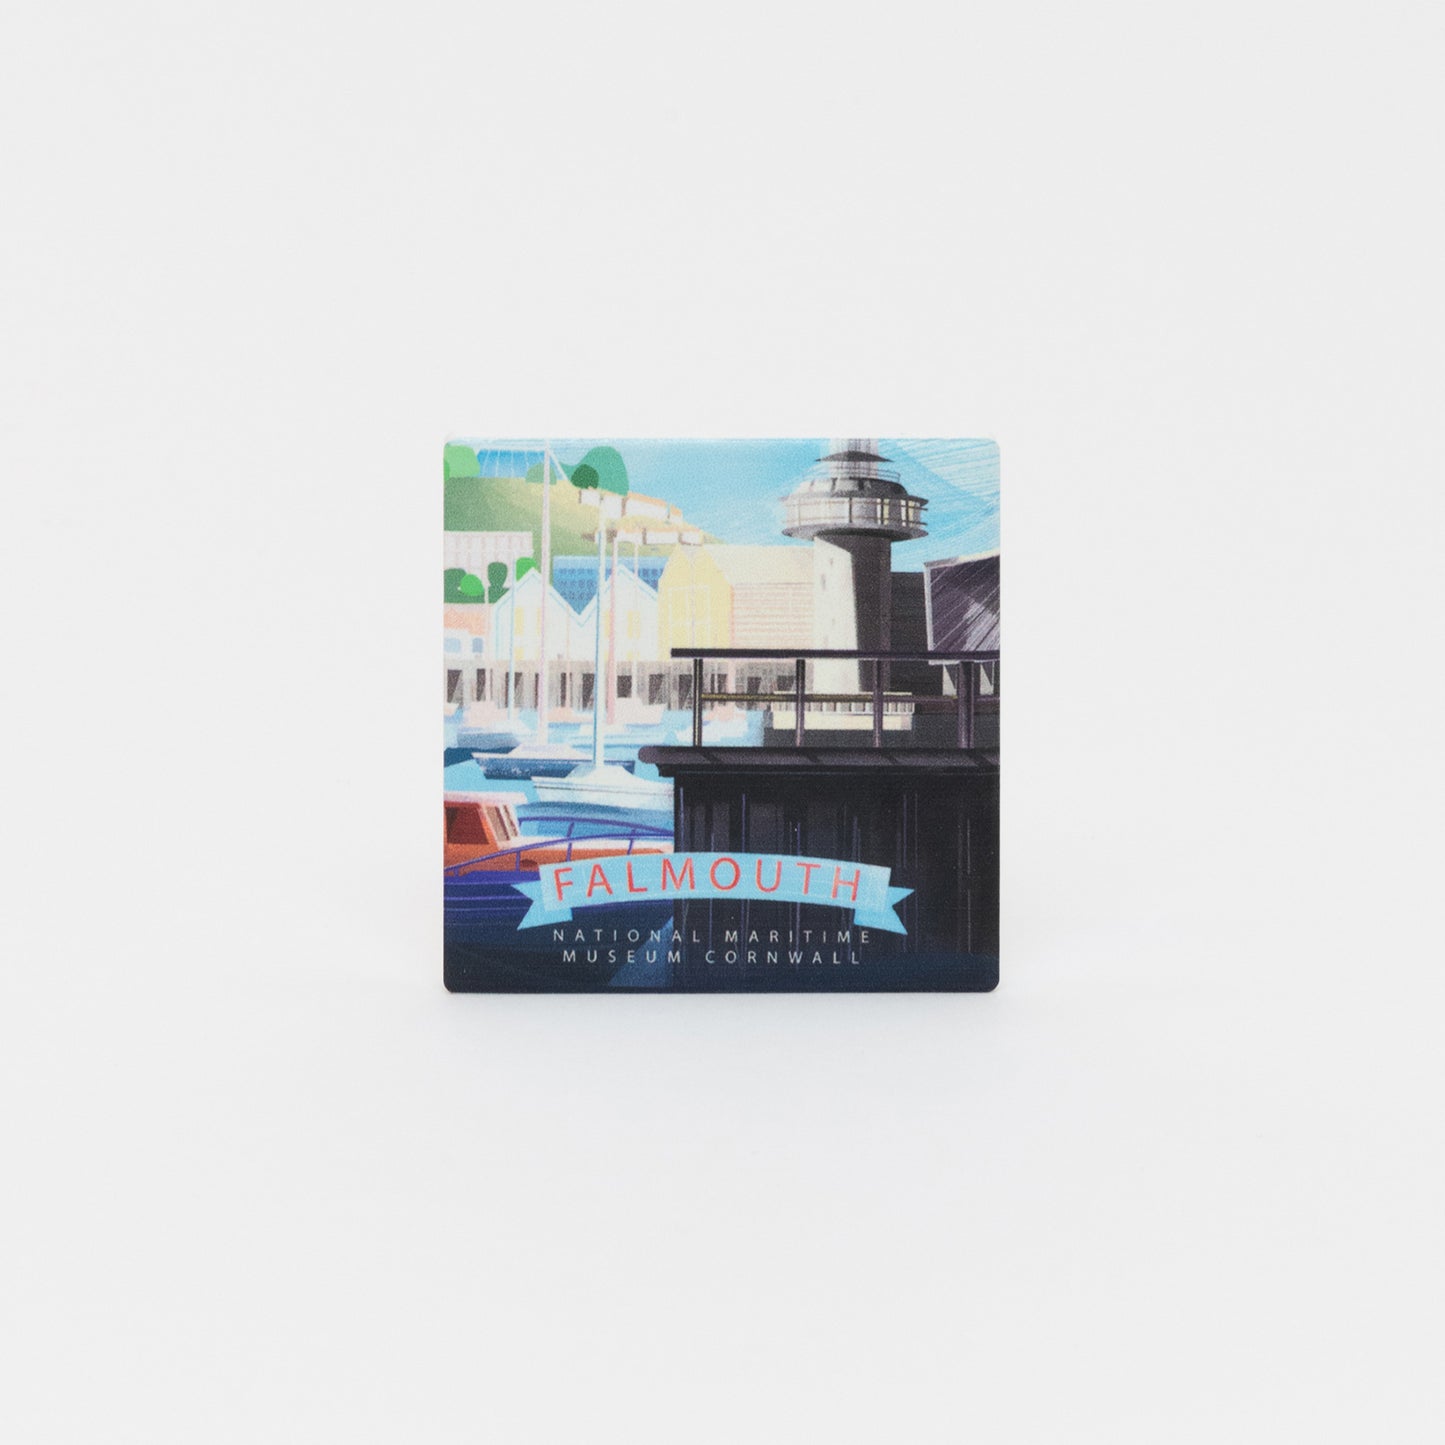 A top-down photo of the National Maritime Museum Cornwall coaster on a white background. The coaster features an illustration of the Museum and Falmouth Harbour.